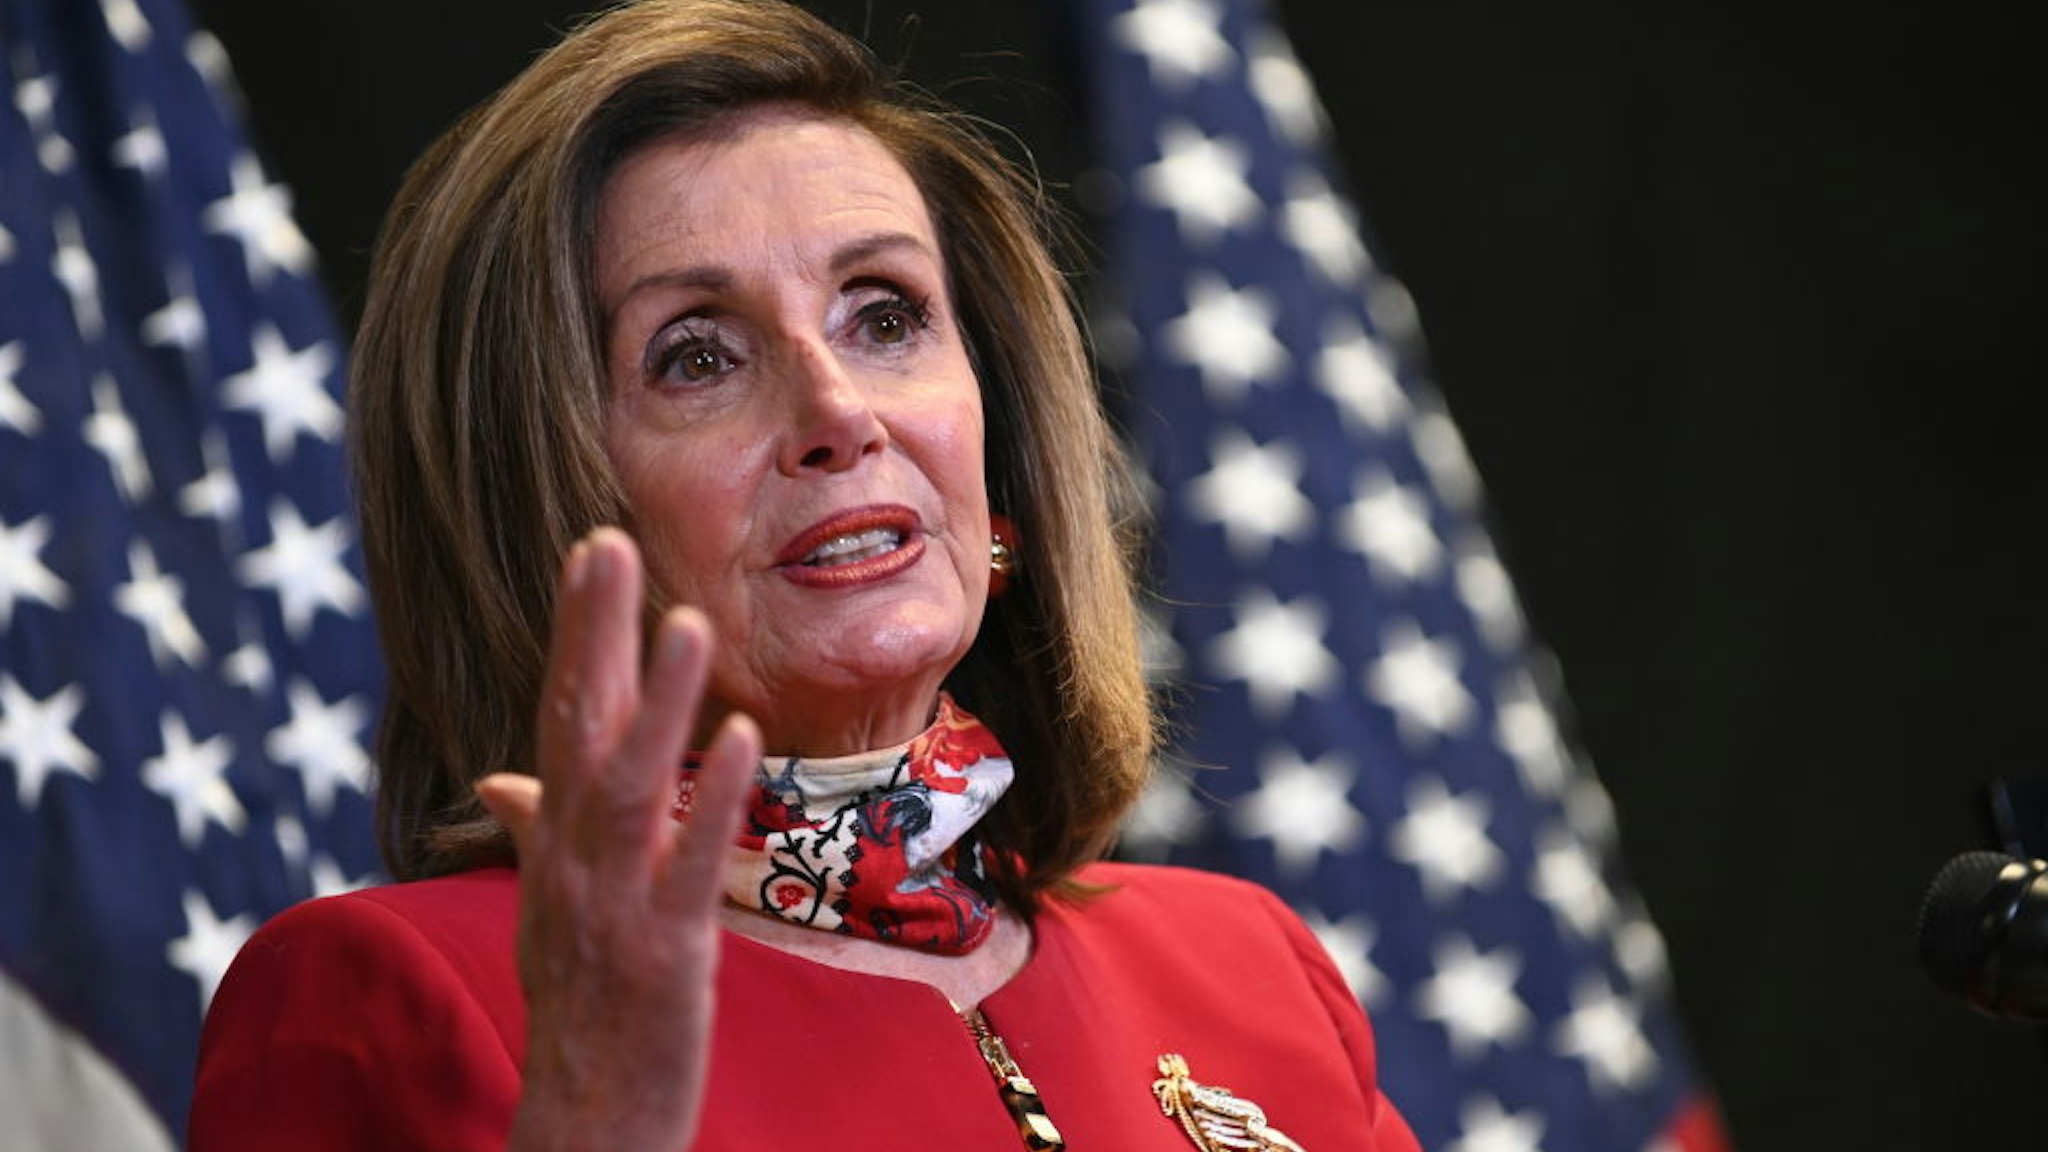 U.S. House Speaker Nancy Pelosi, a Democrat from California, speaks during a news conference at the Democratic Congressional Campaign Committee headquarters in Washington, D.C., U.S., on Tuesday, Nov. 3, 2020.